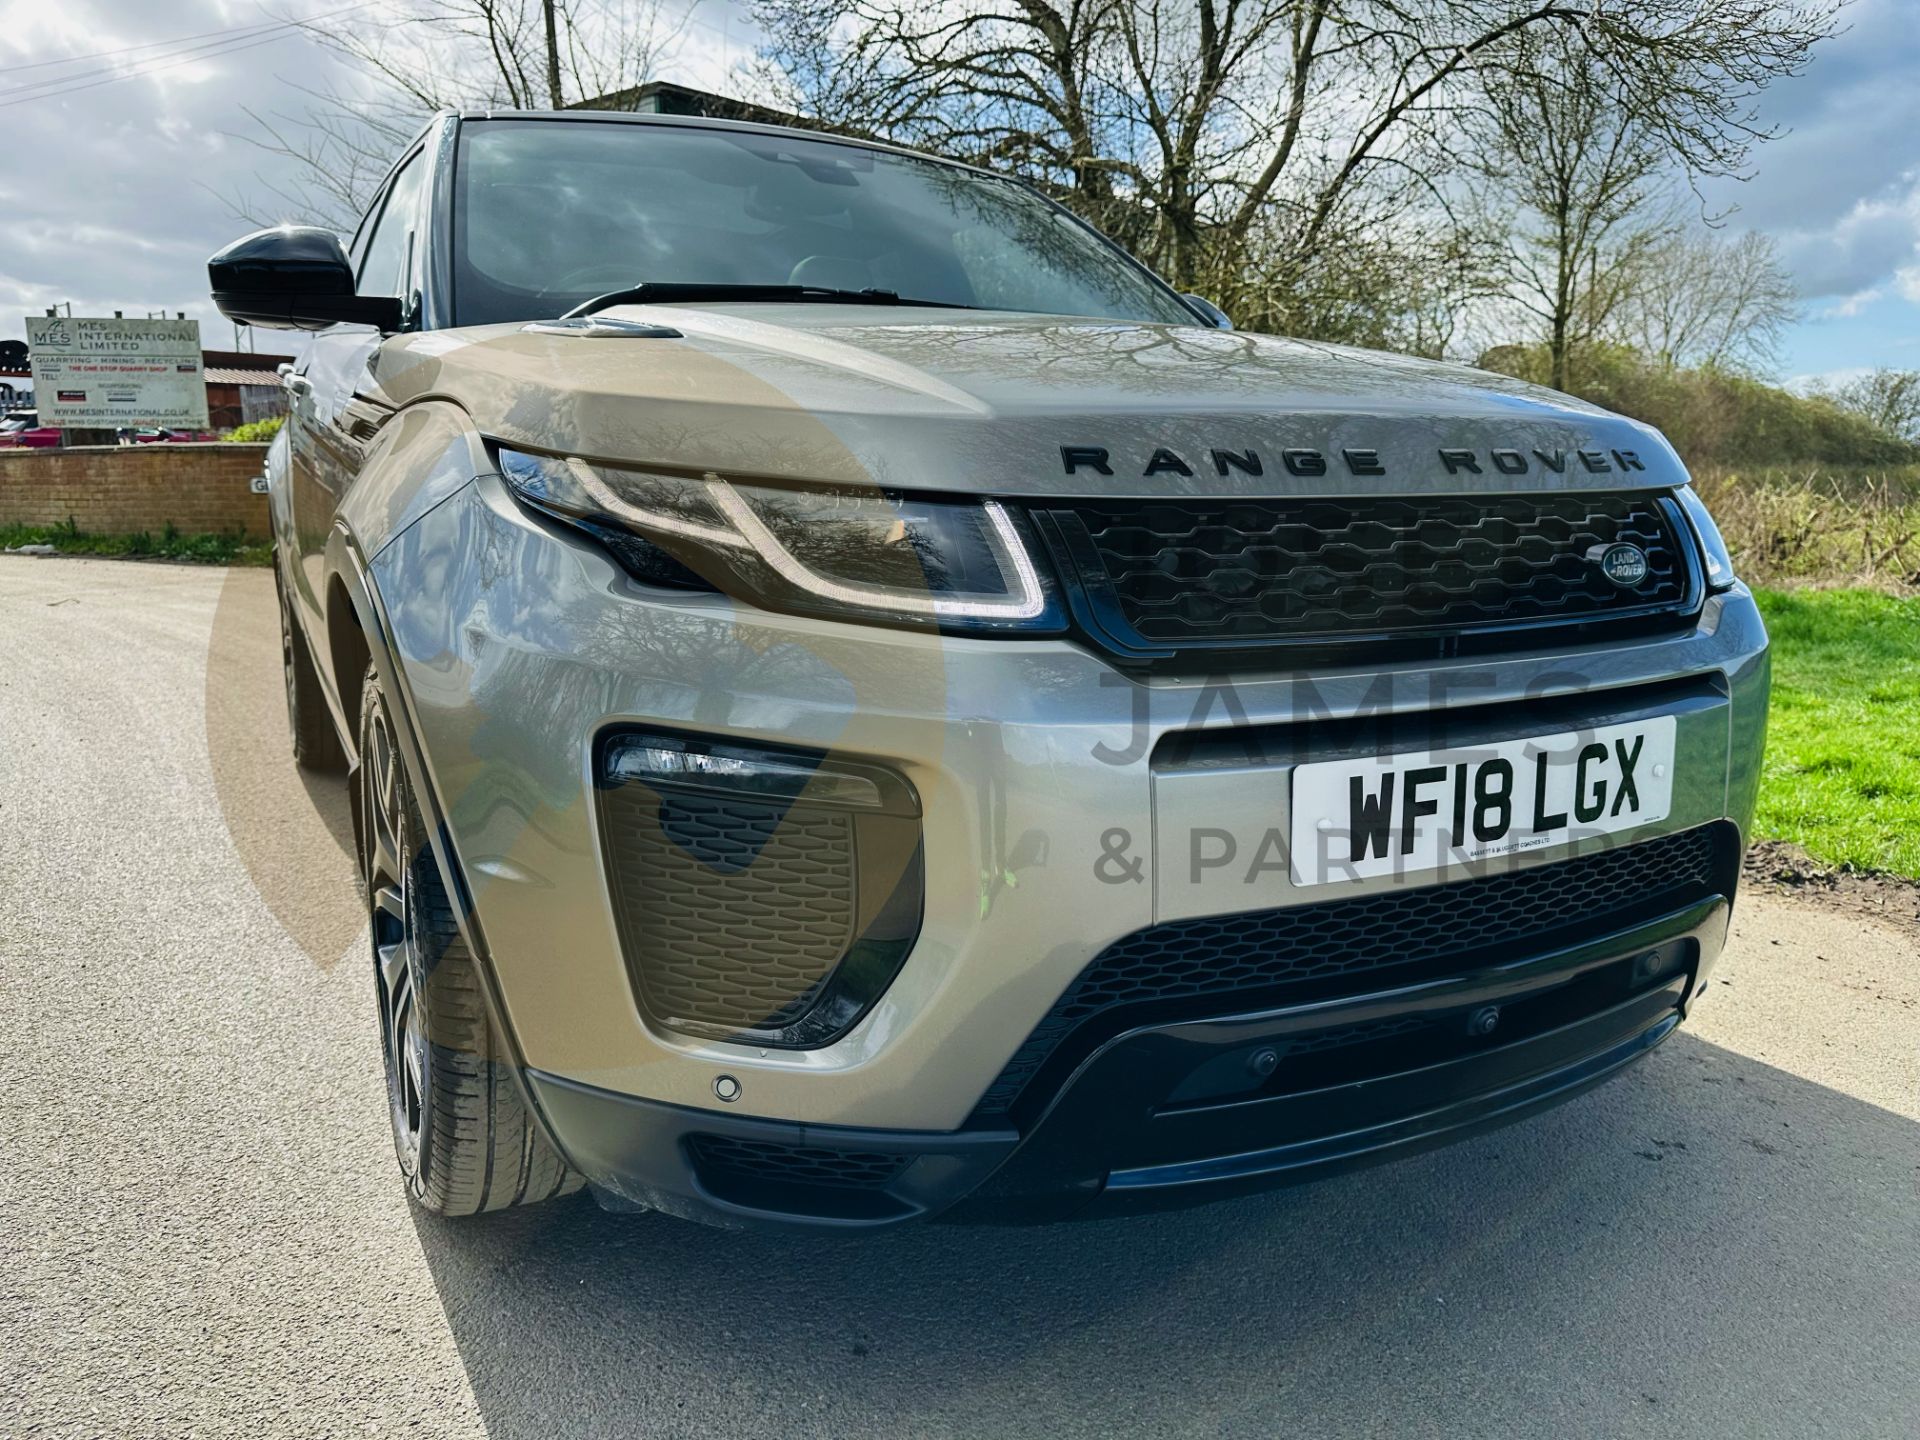 (On Sale) RANGE ROVER EVOQUE *HSE DYNAMIC* SUV (2018 - EURO 6) 2.0 SD4 - AUTOMATIC *ULTIMATE SPEC* - Image 3 of 48